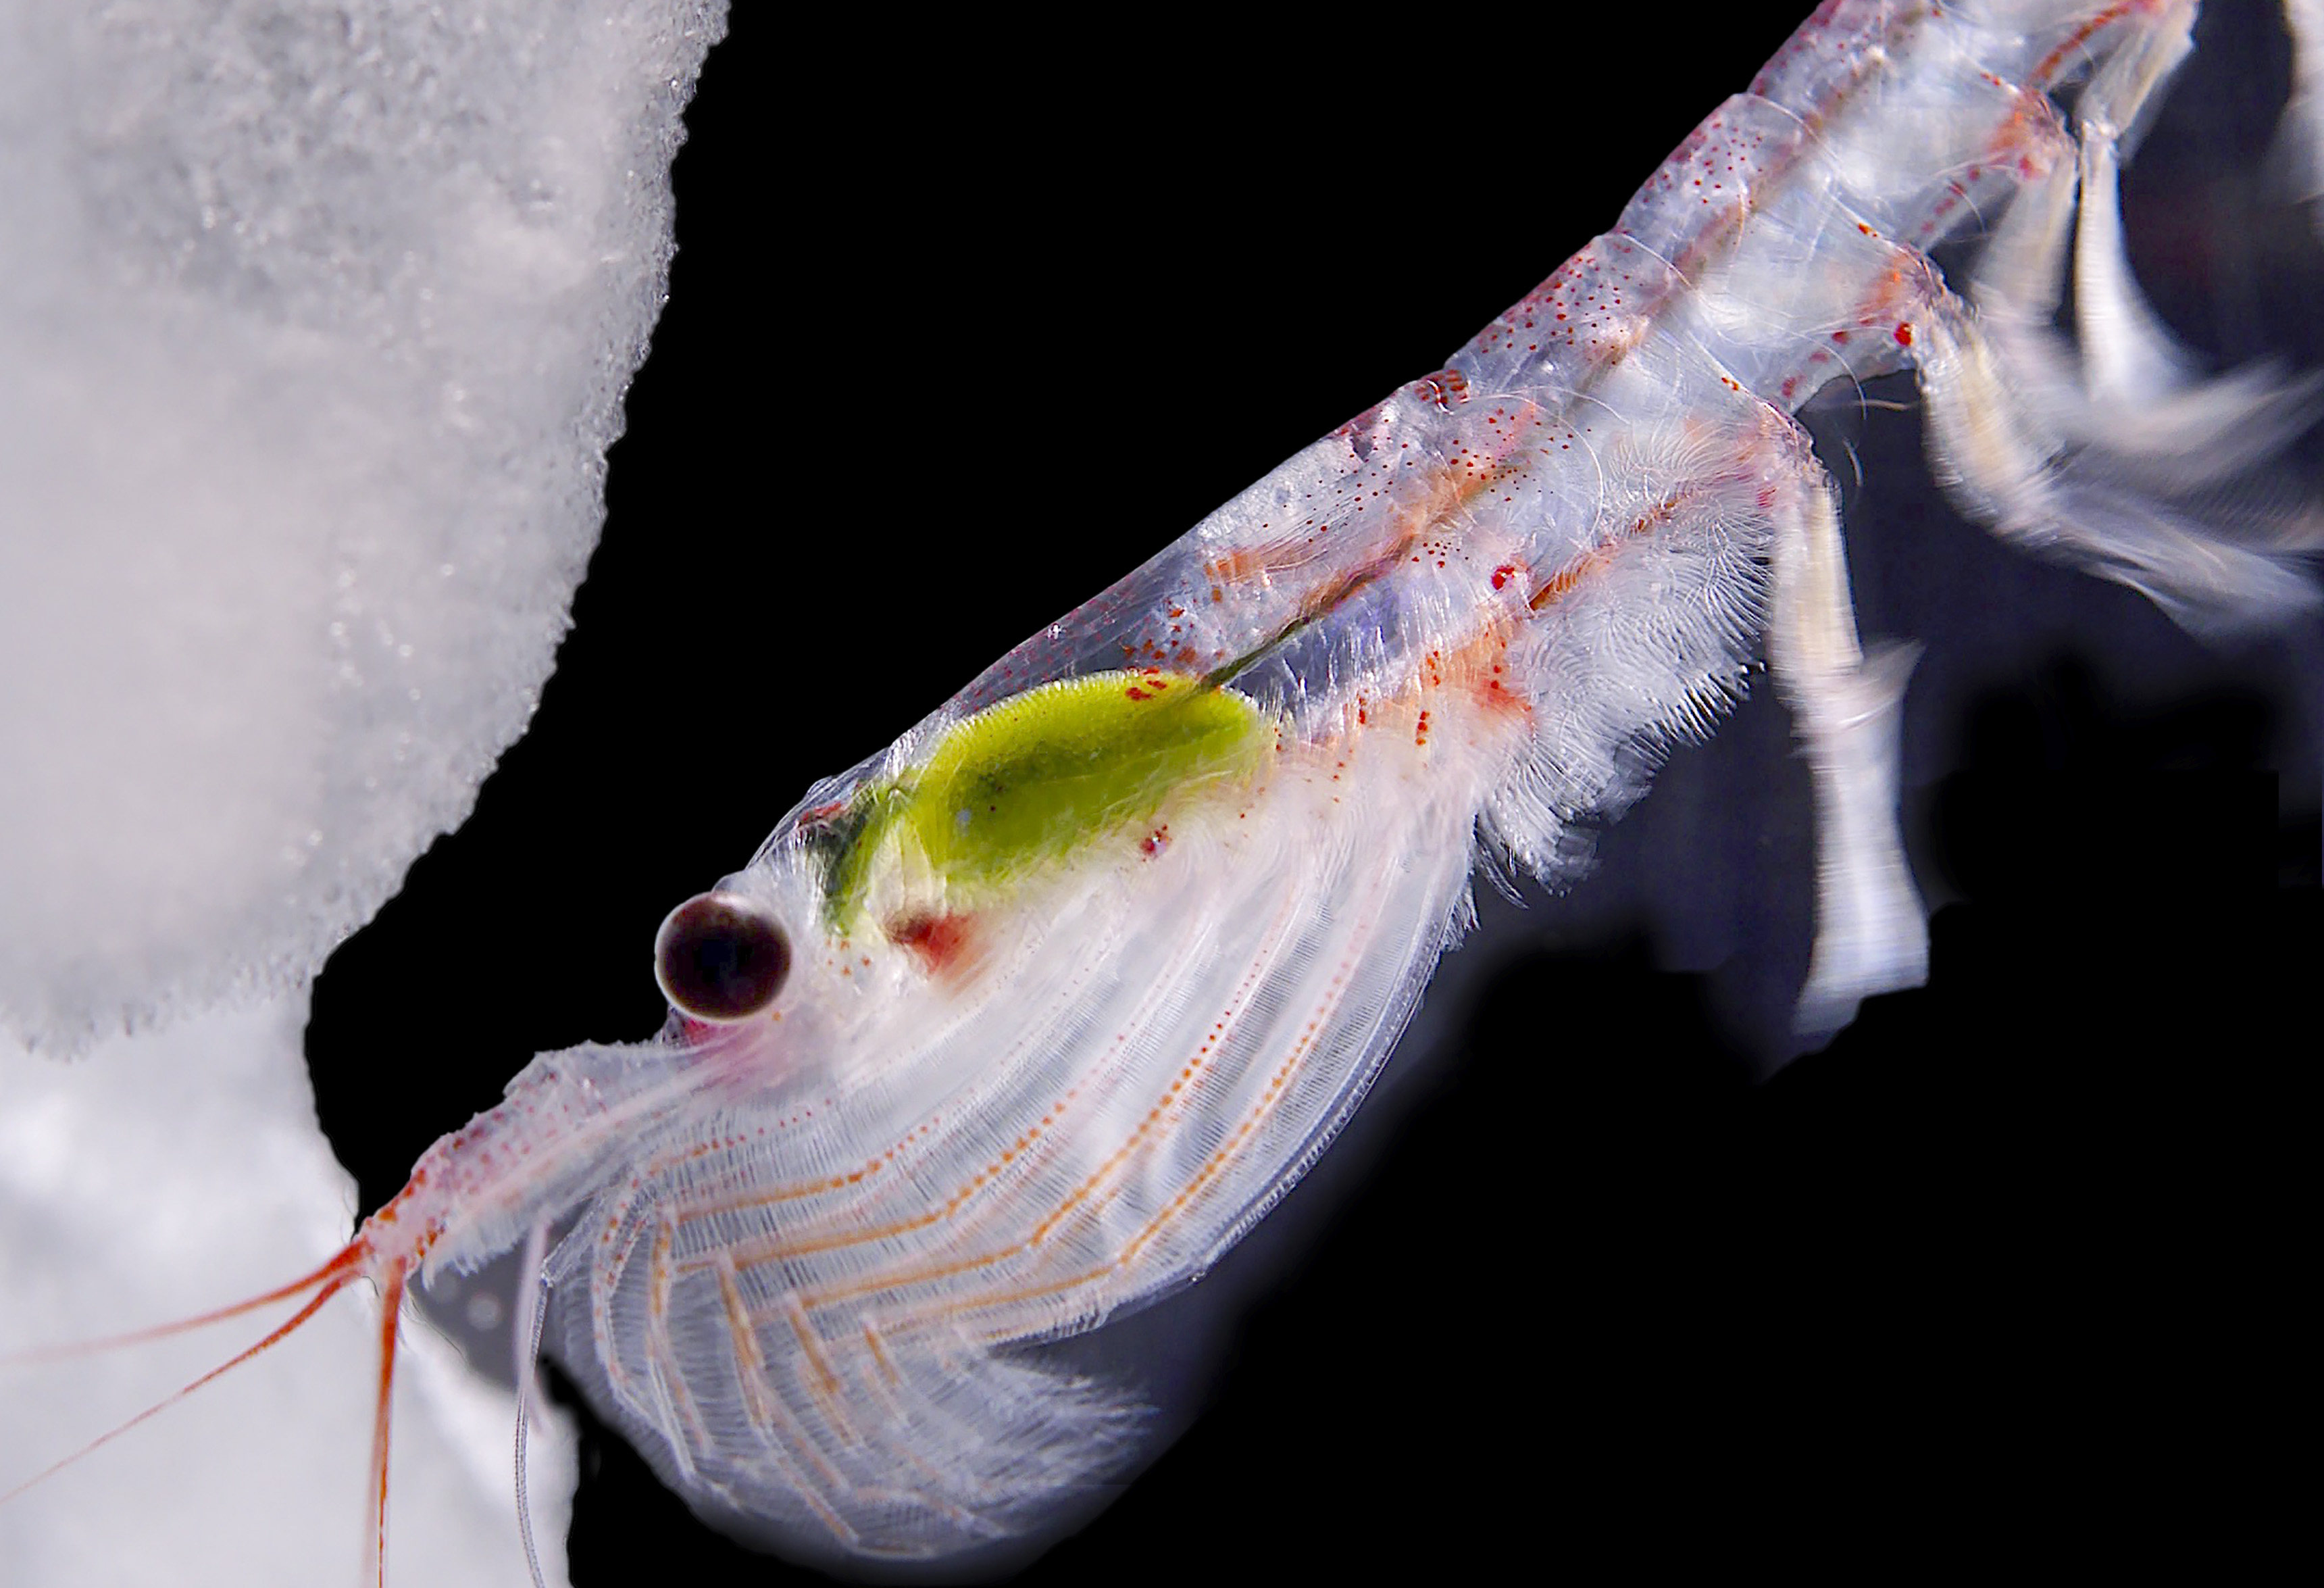 Hundreds of millions of tonnes of Antarctic krill live in the sub-zero waters of the Southern Ocean. Photo: Simon Payne, Australian Antarctic Division